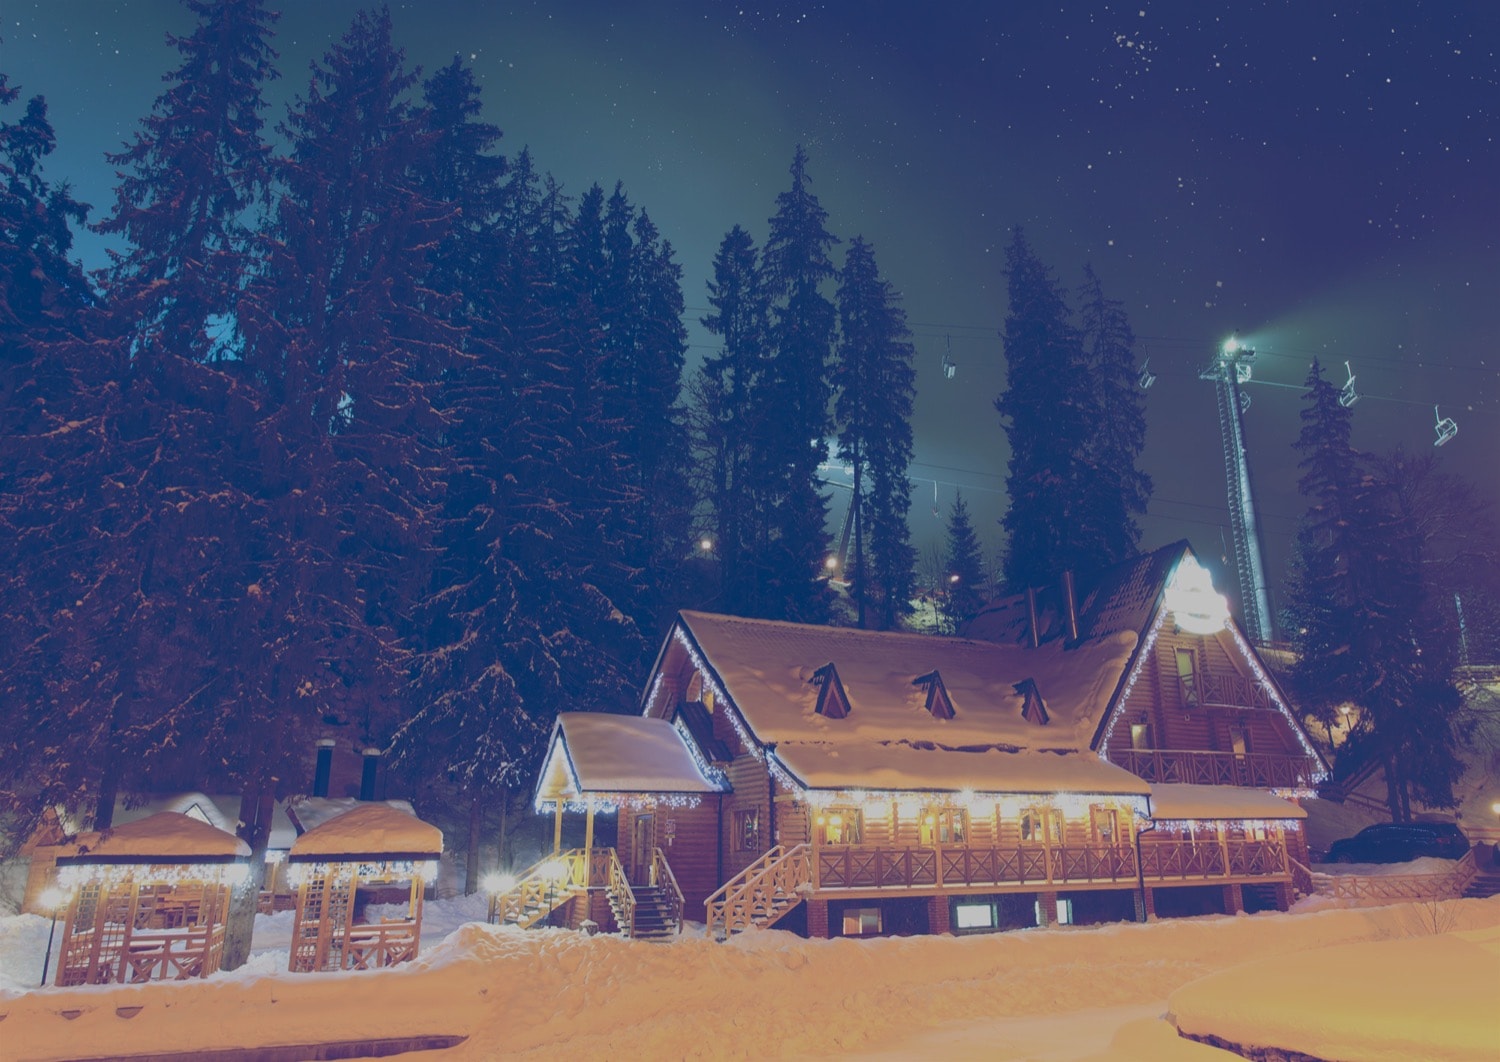 Ski Chalet and lift in the middle of the night, covered in snow. 